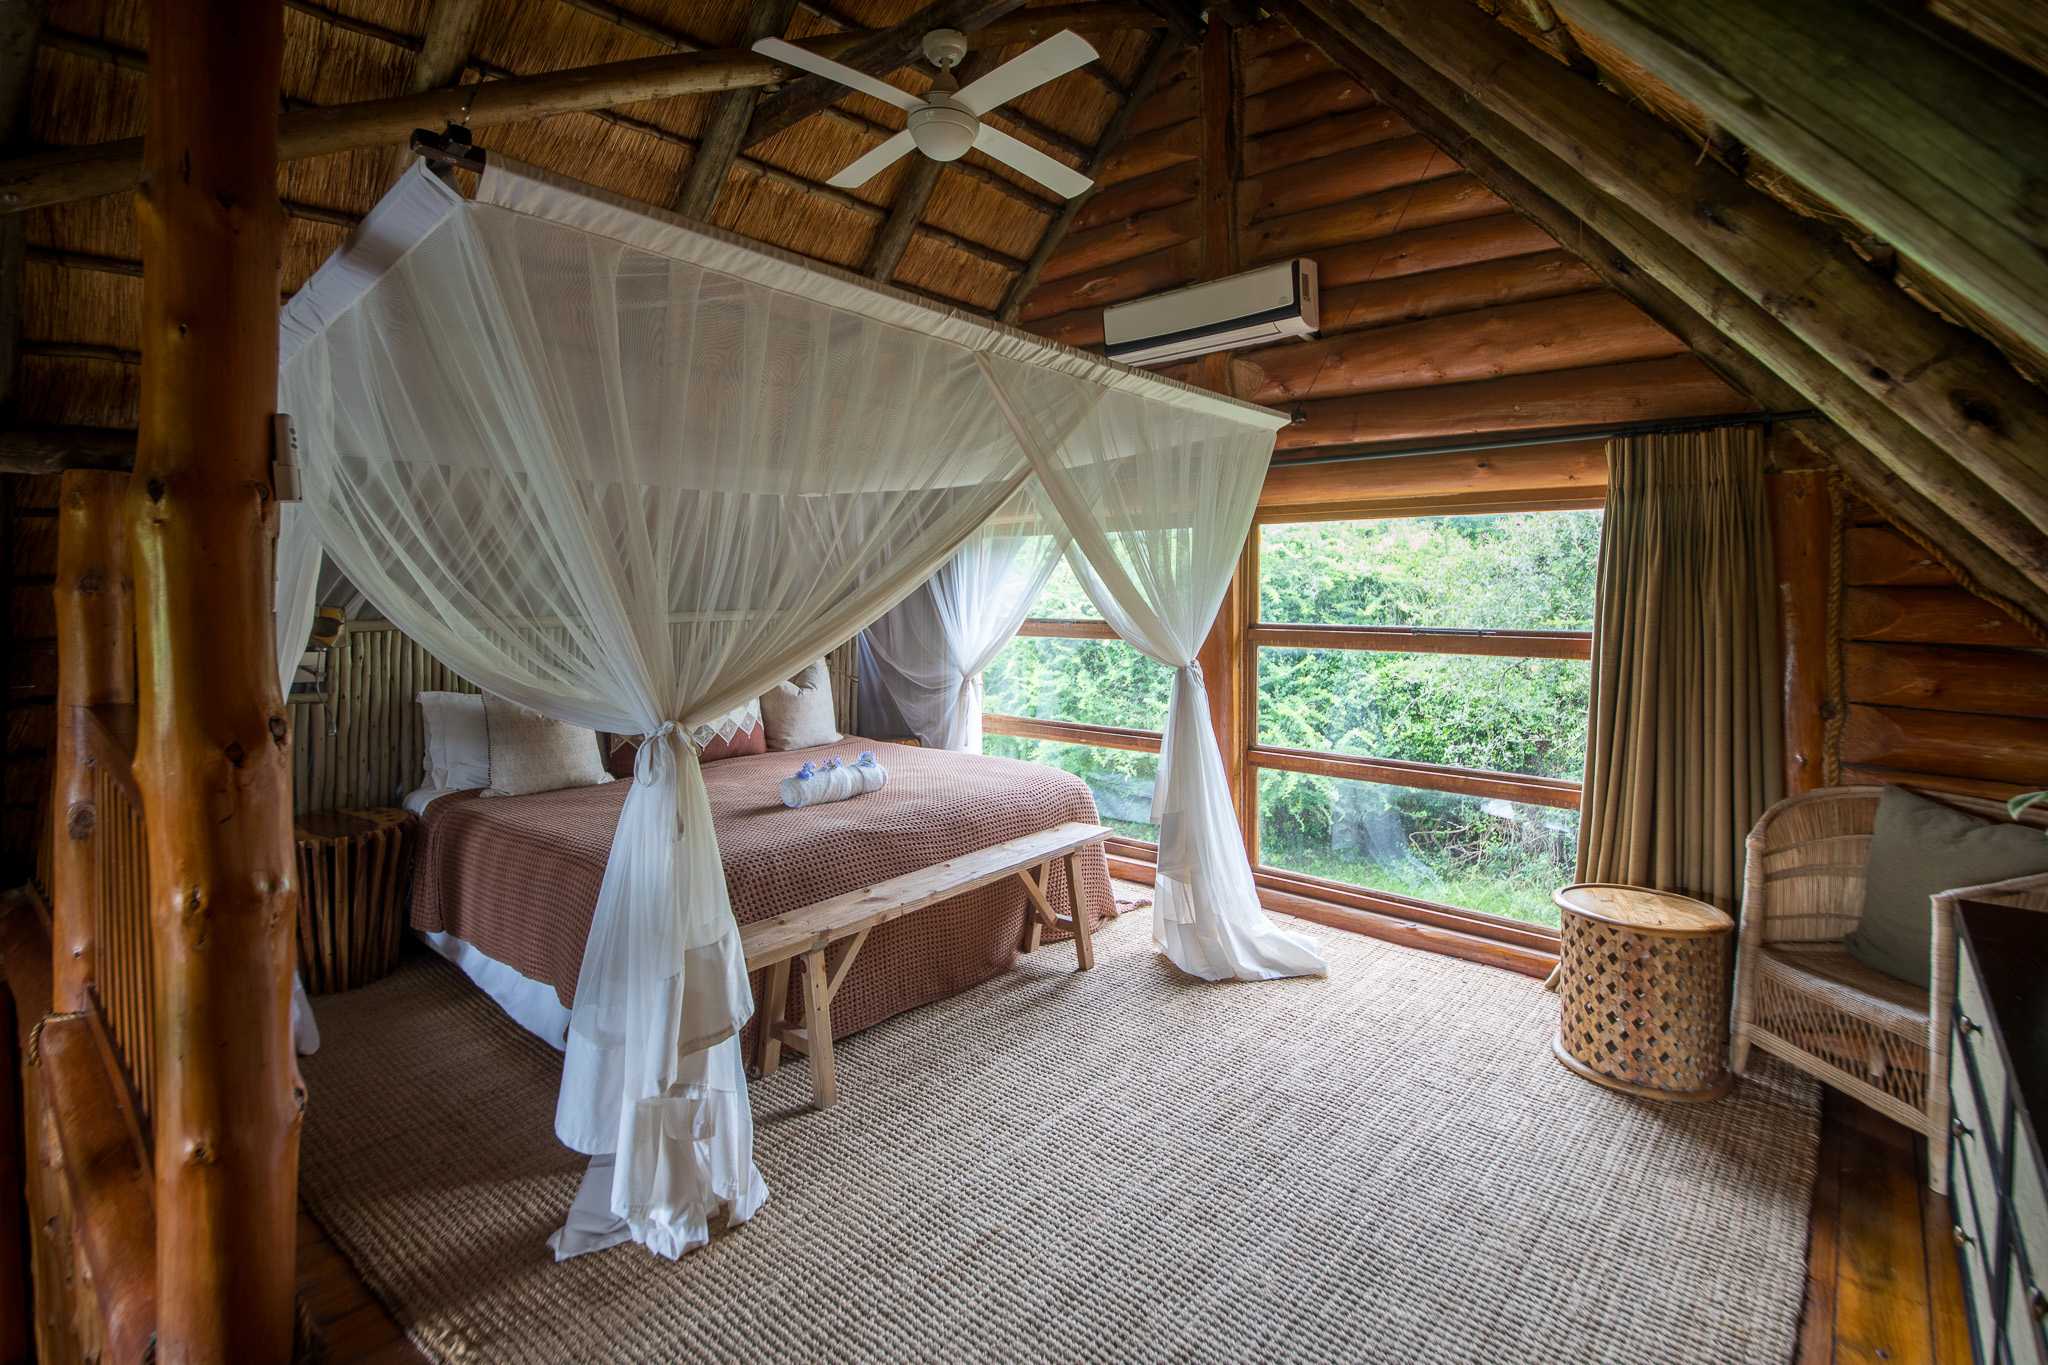 Family Chalet Bedroom at Rhino River Lodge, Manyoni Private Game Reserve (previously the Zululand Rhino Reserve), KwaZulu-Natal